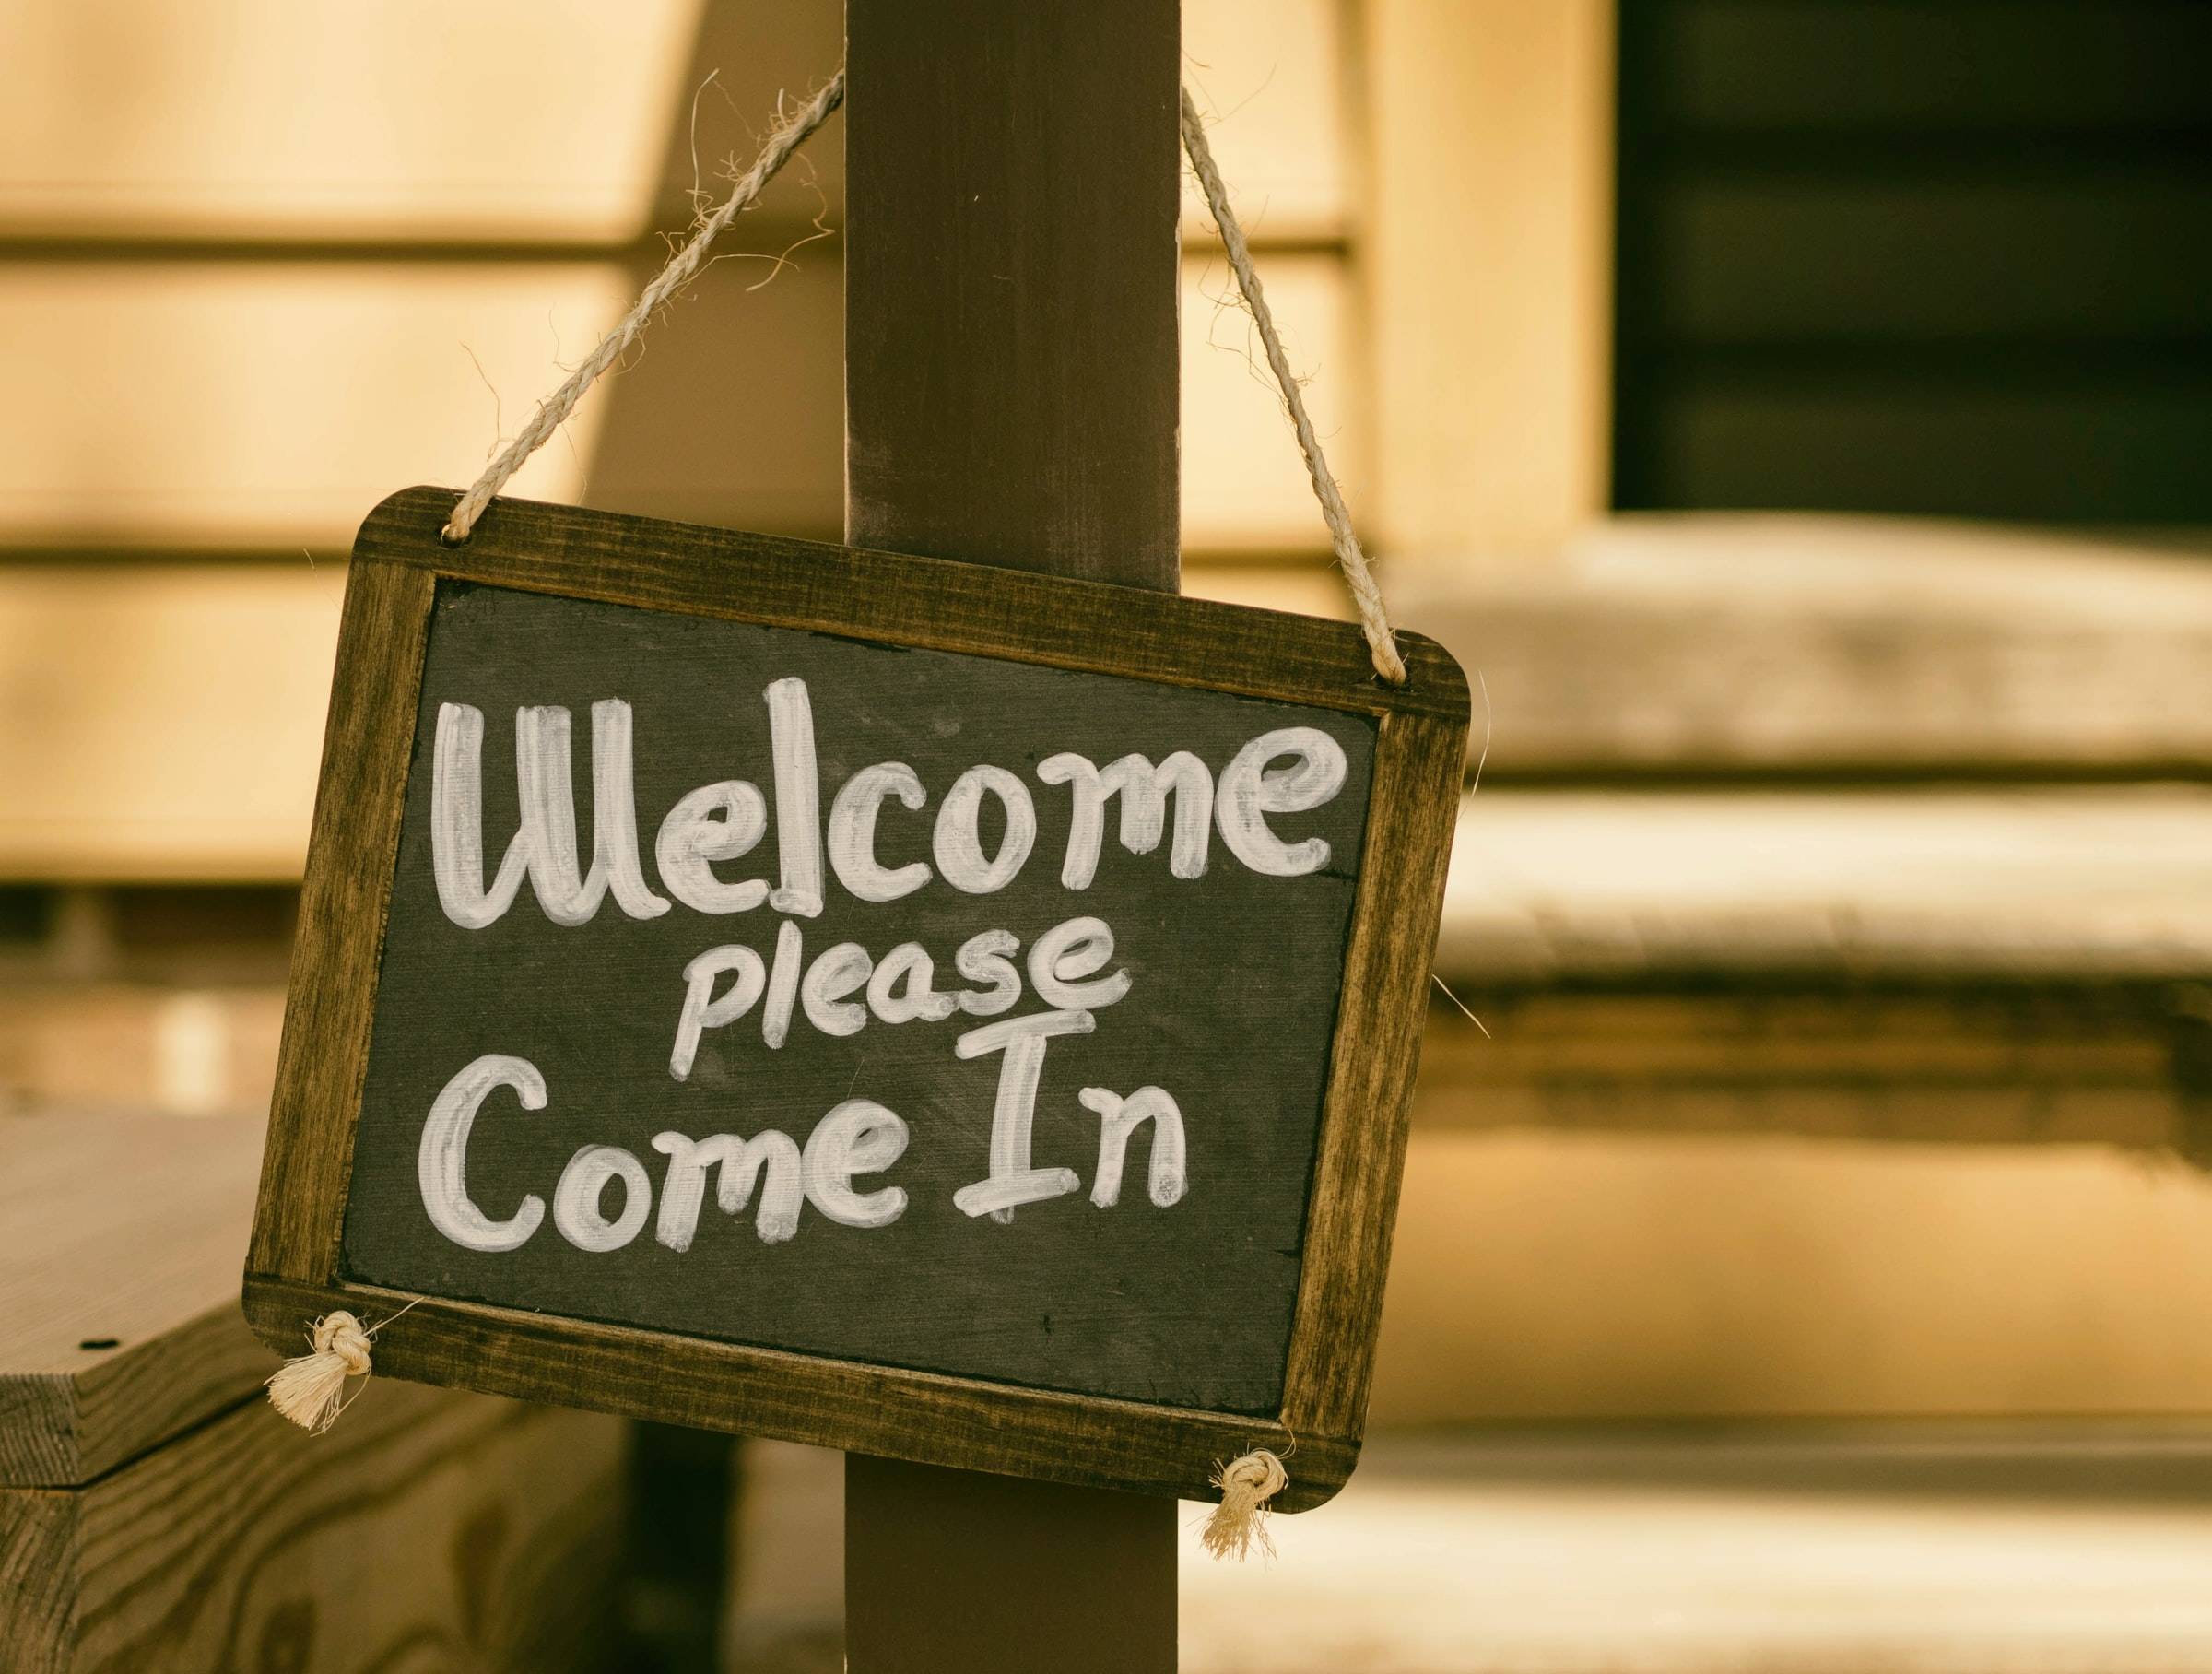 A hanging chalkboard sign that says "Welcome please come in."